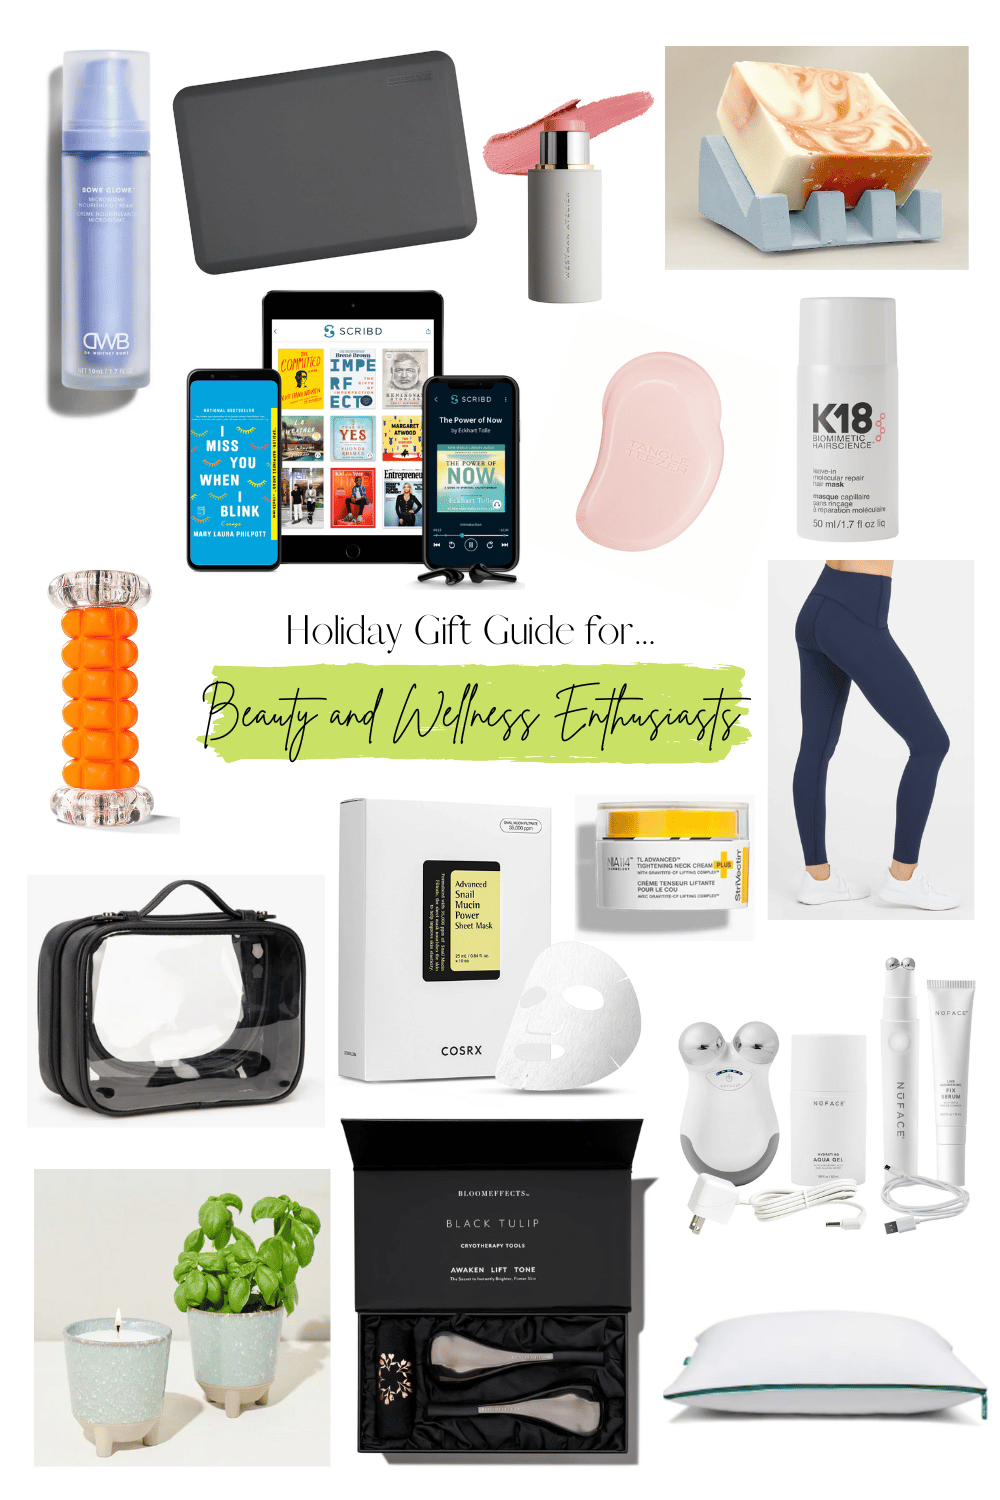 Target Gift Ideas for the Whole Family - Blushing Rose Style Blog